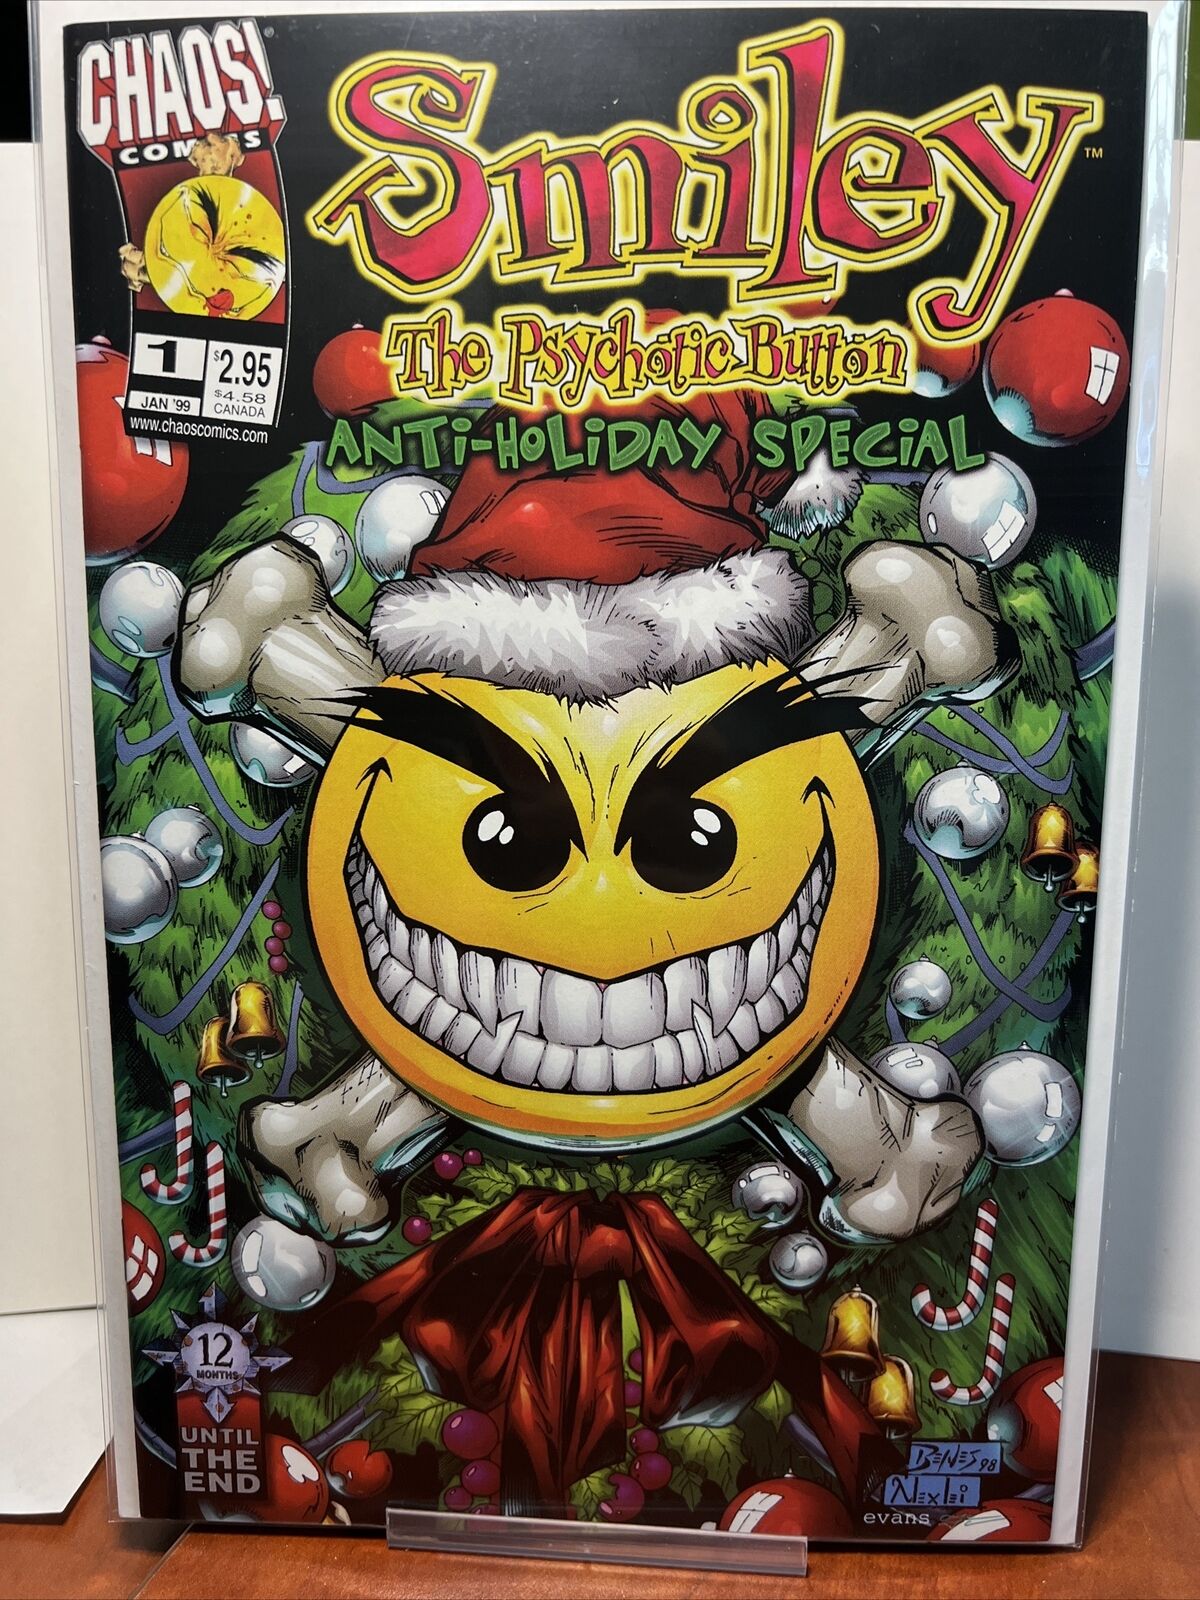 Smiley The psychotic Button Anti Holiday Special #1 Chaos Comics